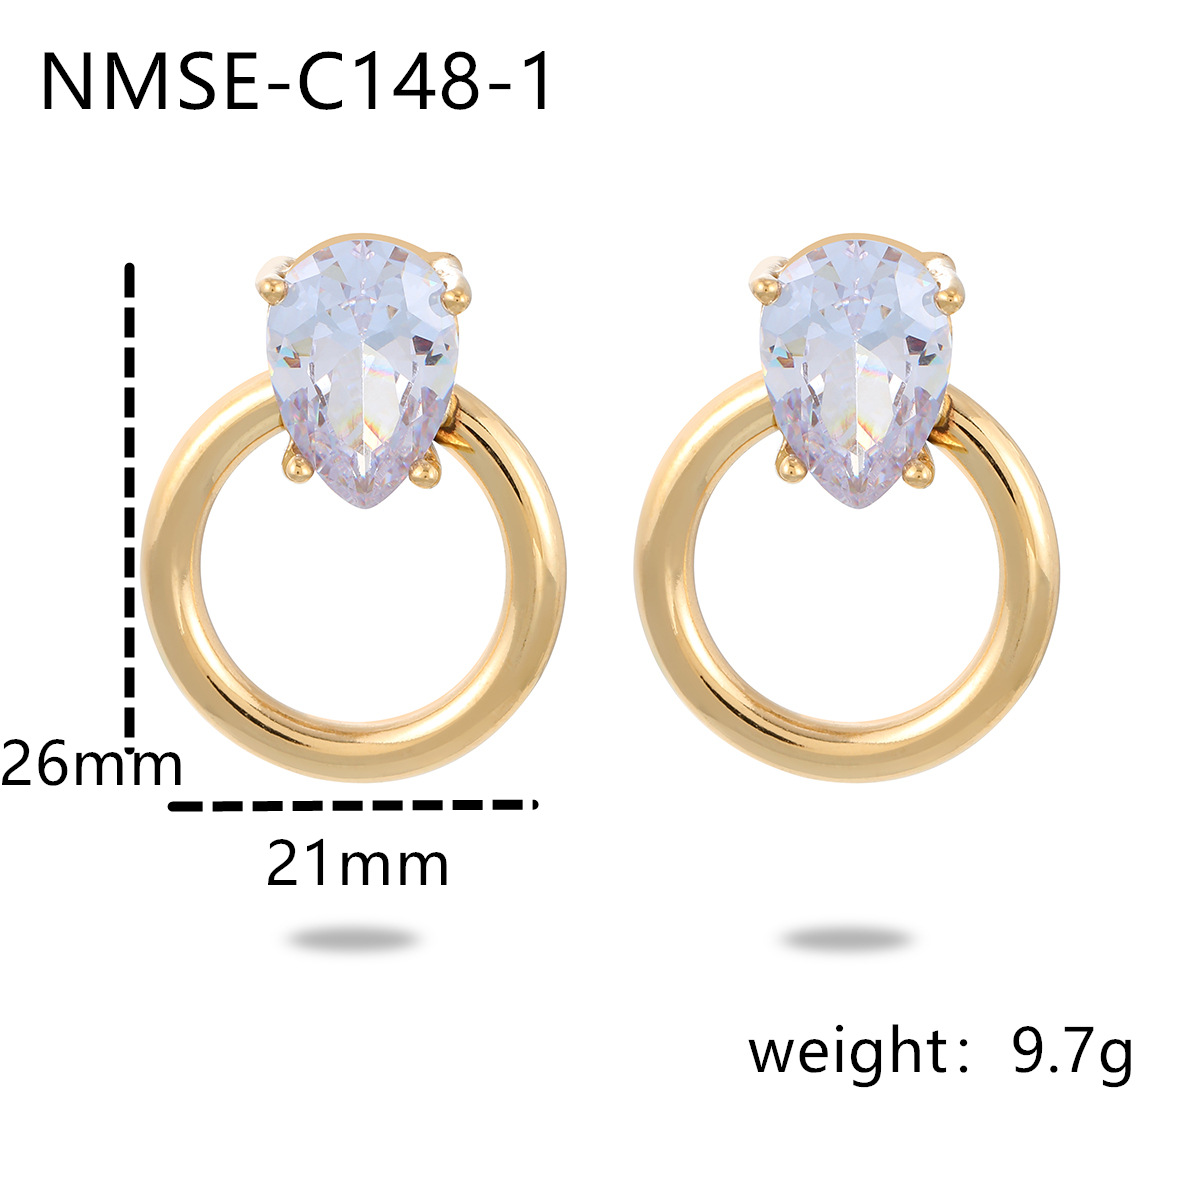 2:NMSE-C148-1